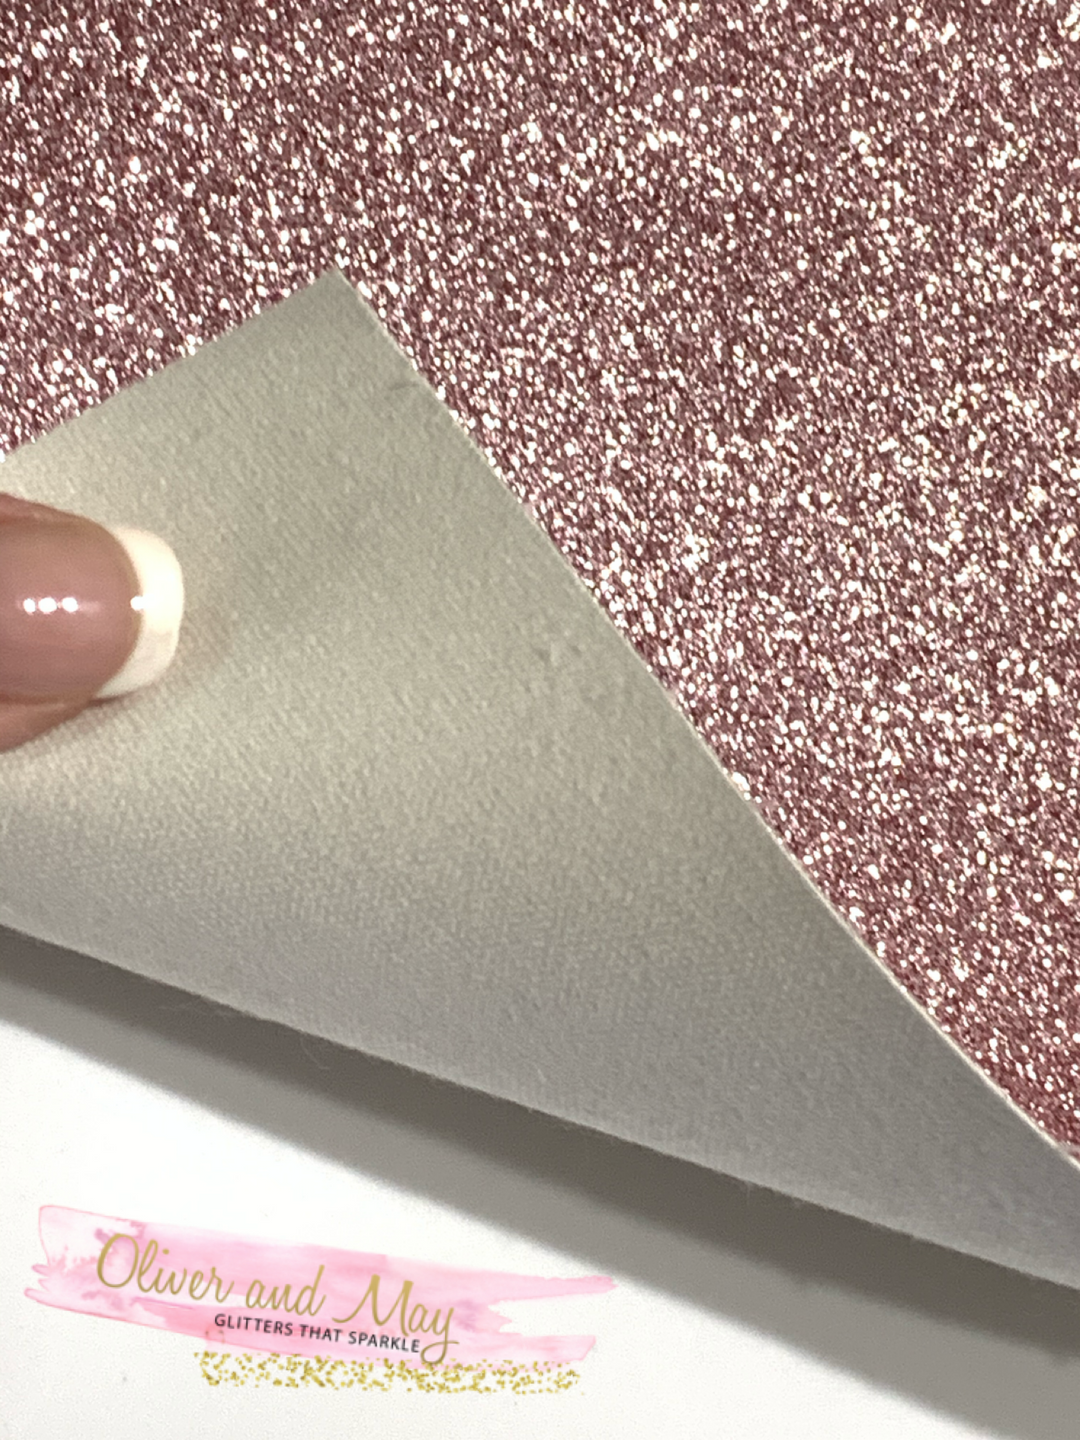 Pink Rose Gold Fine Glitter Fabric Sheet Thin 0.65mm A4 or A5 Sheet - Great for Button Earrings